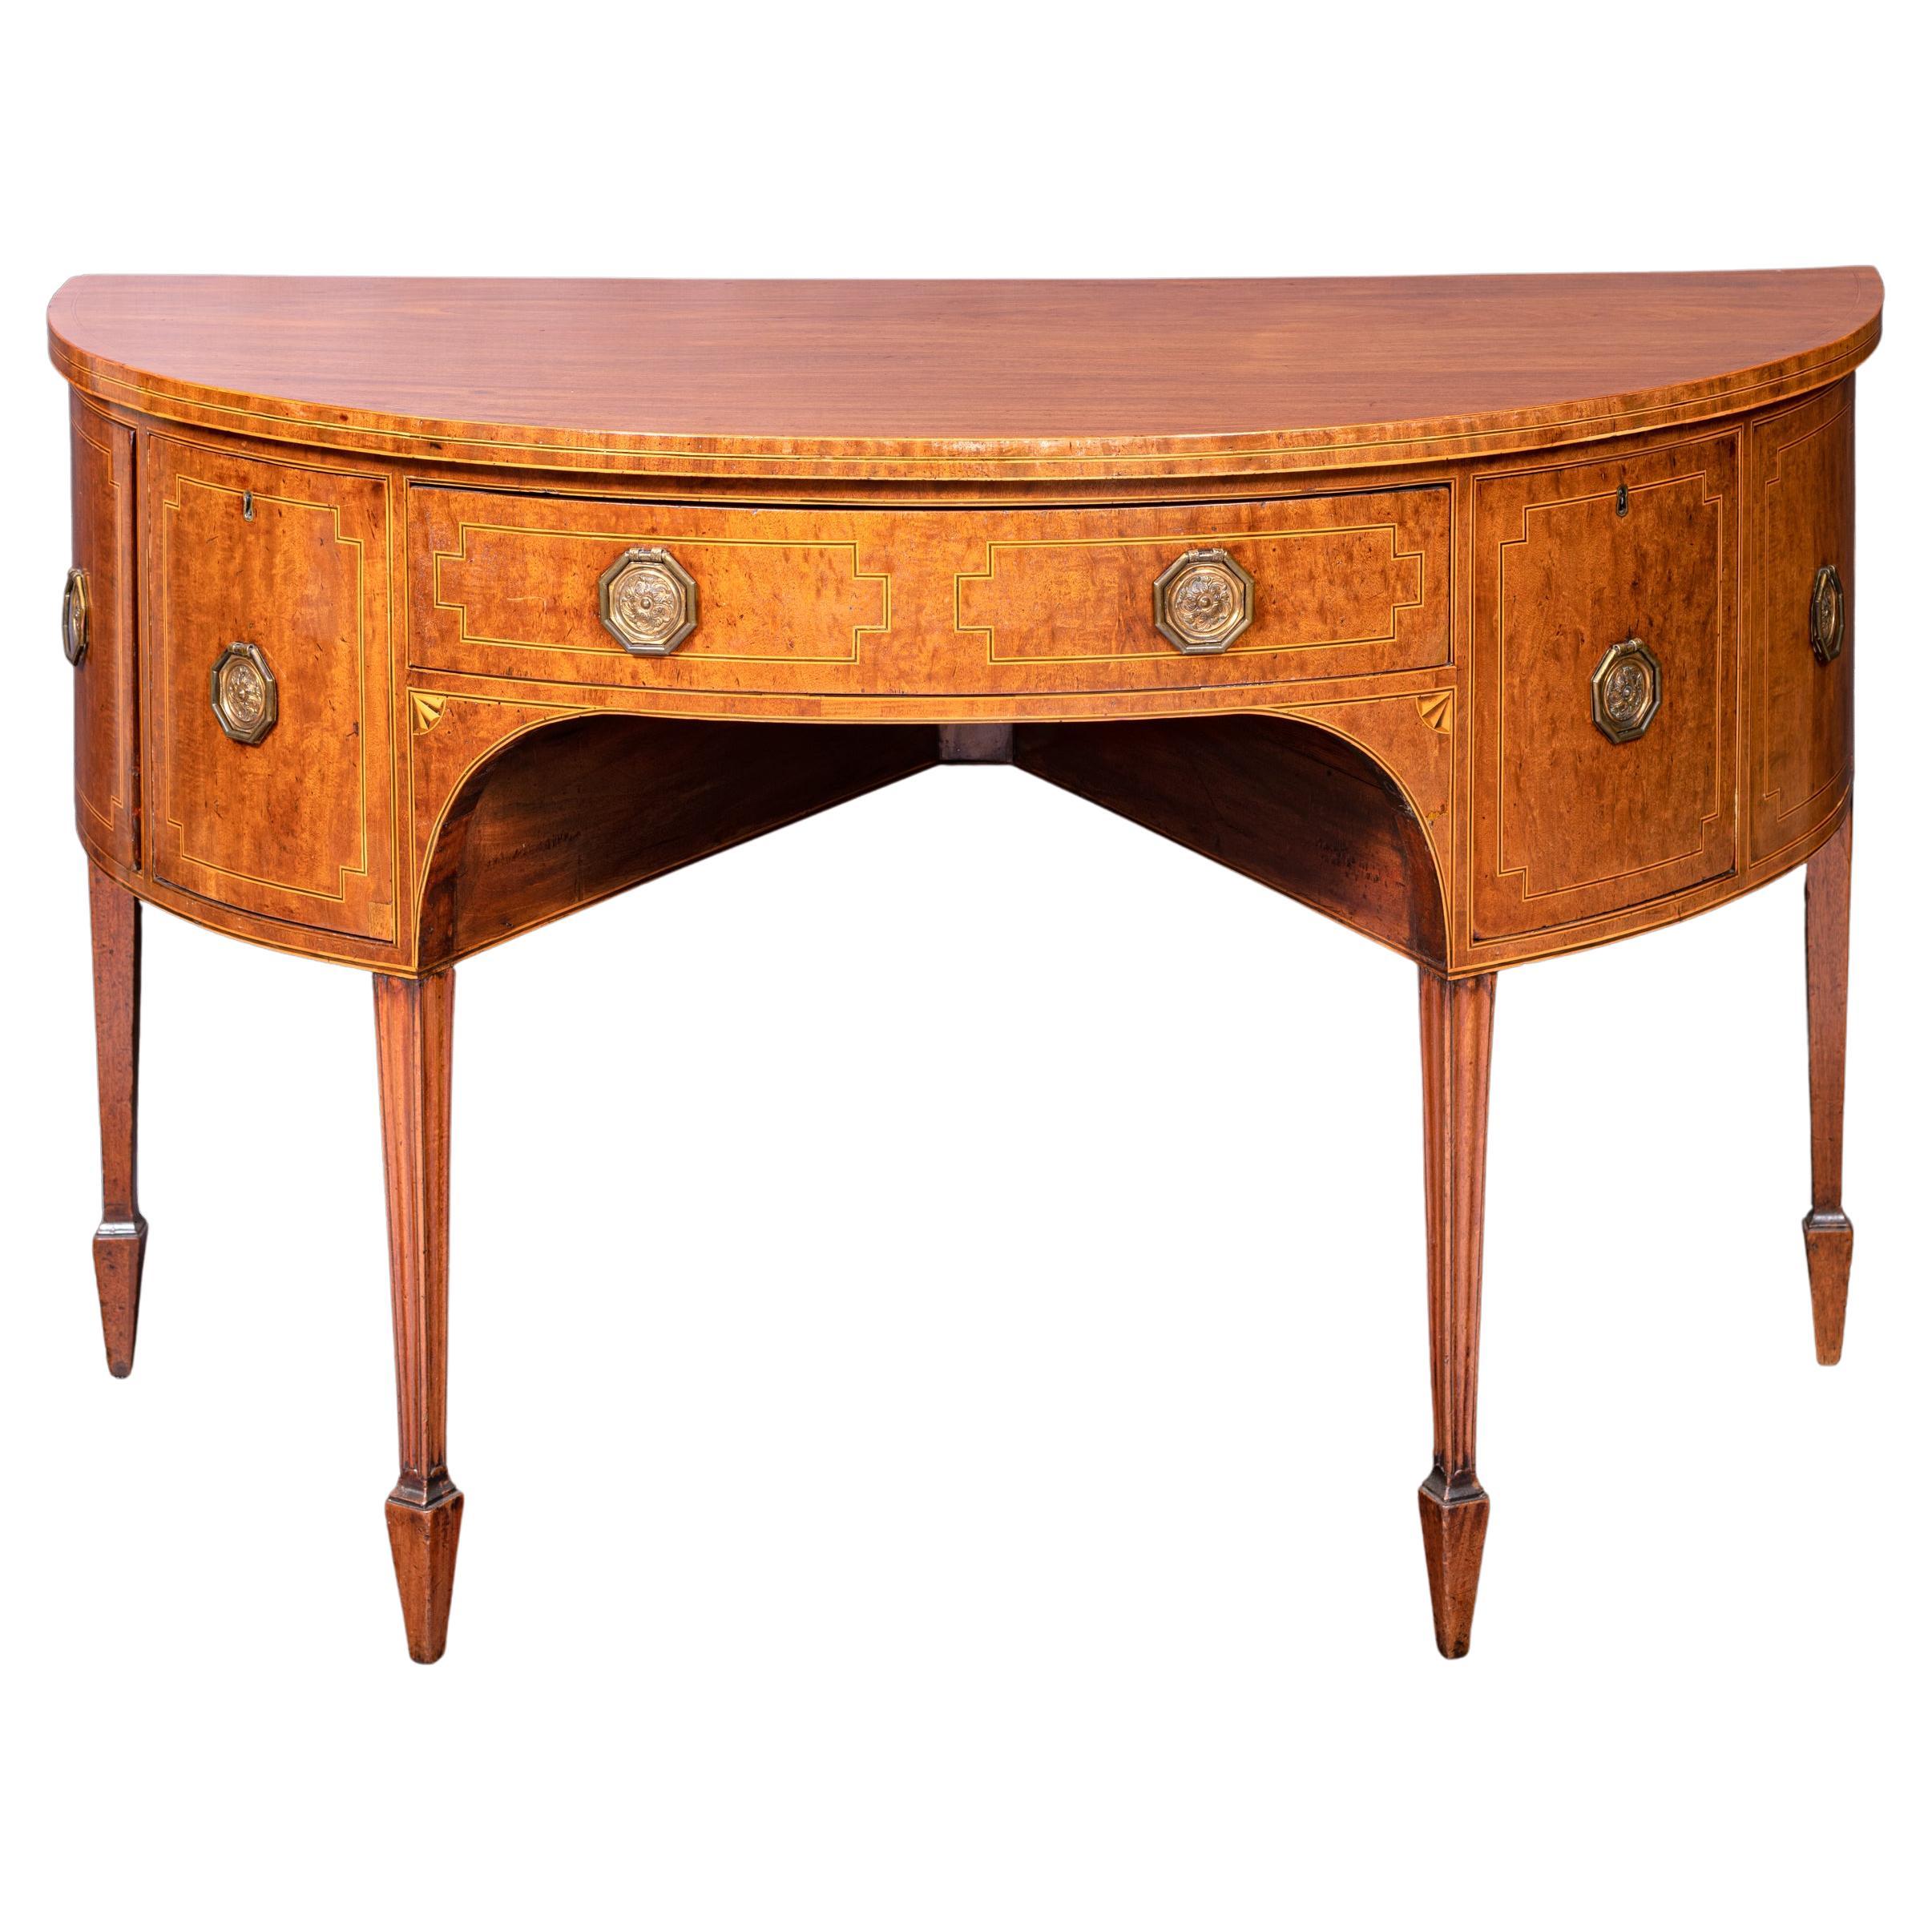 A fine Georgian mahogany Demi -lune shaped sideboard, with a central drawer flanked by two further cupboards with brass ring handles, on tapering block legs which terminate in contrasting spade feet.

Circa 1790

English

Great color and